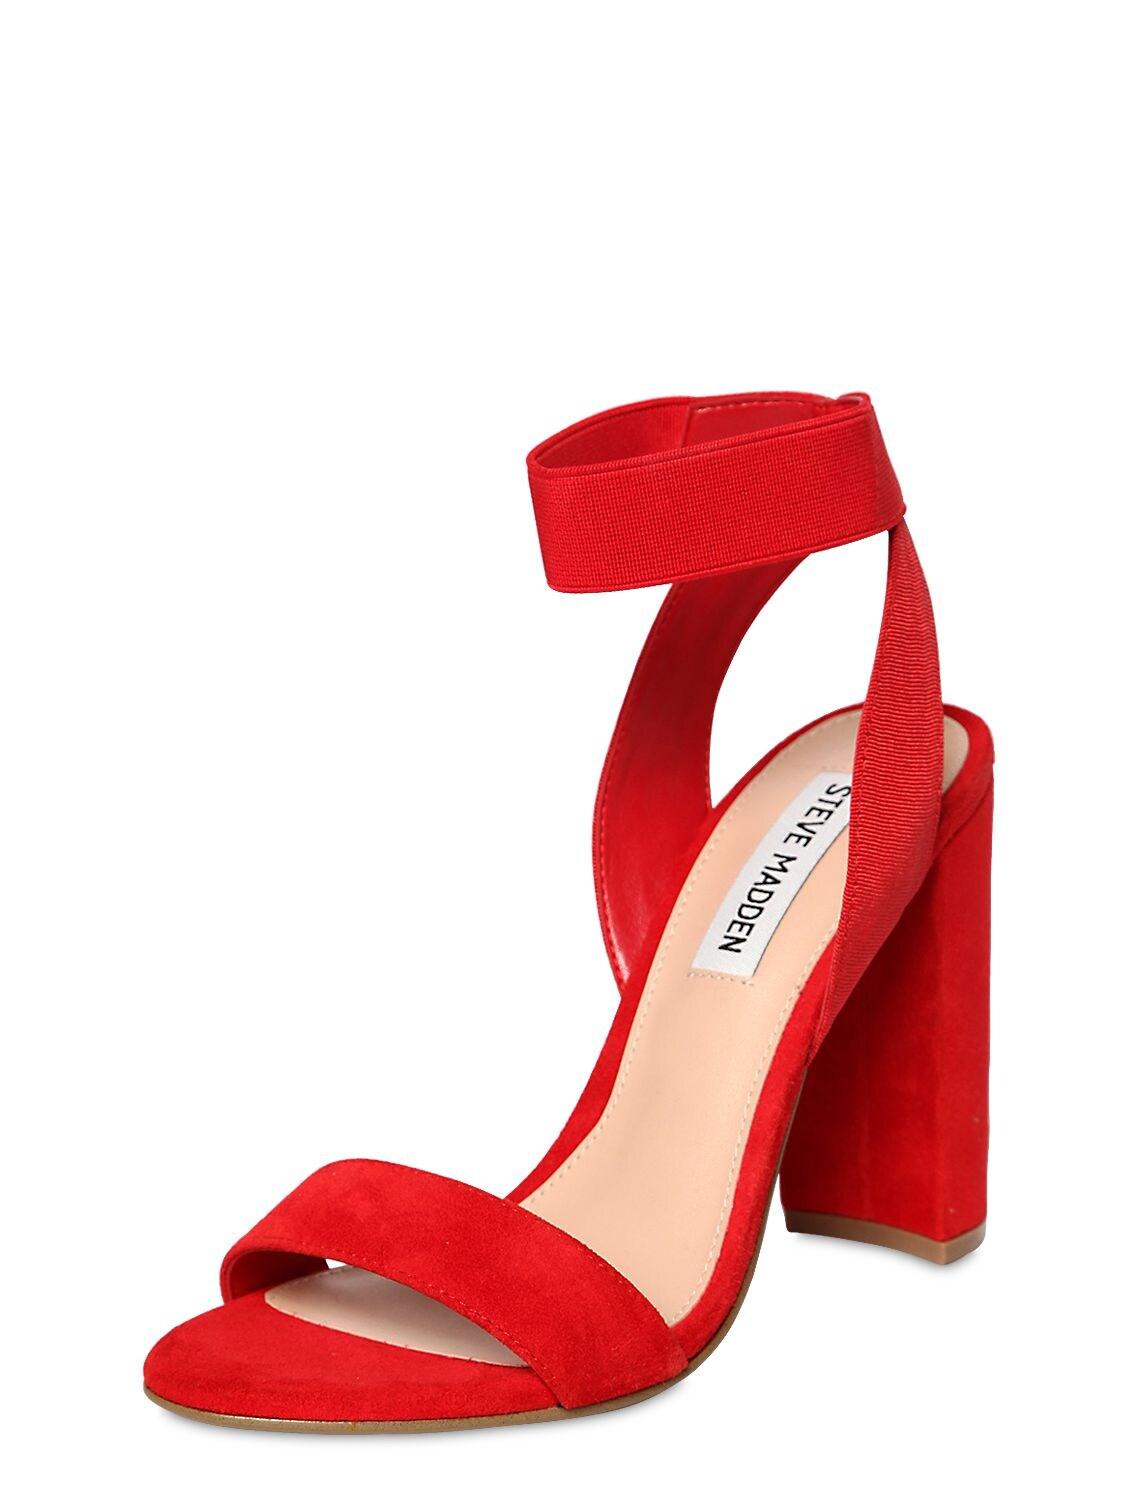 Steve Madden 100mm Celebrate Elastic & Suede Sandals in Red | Lyst